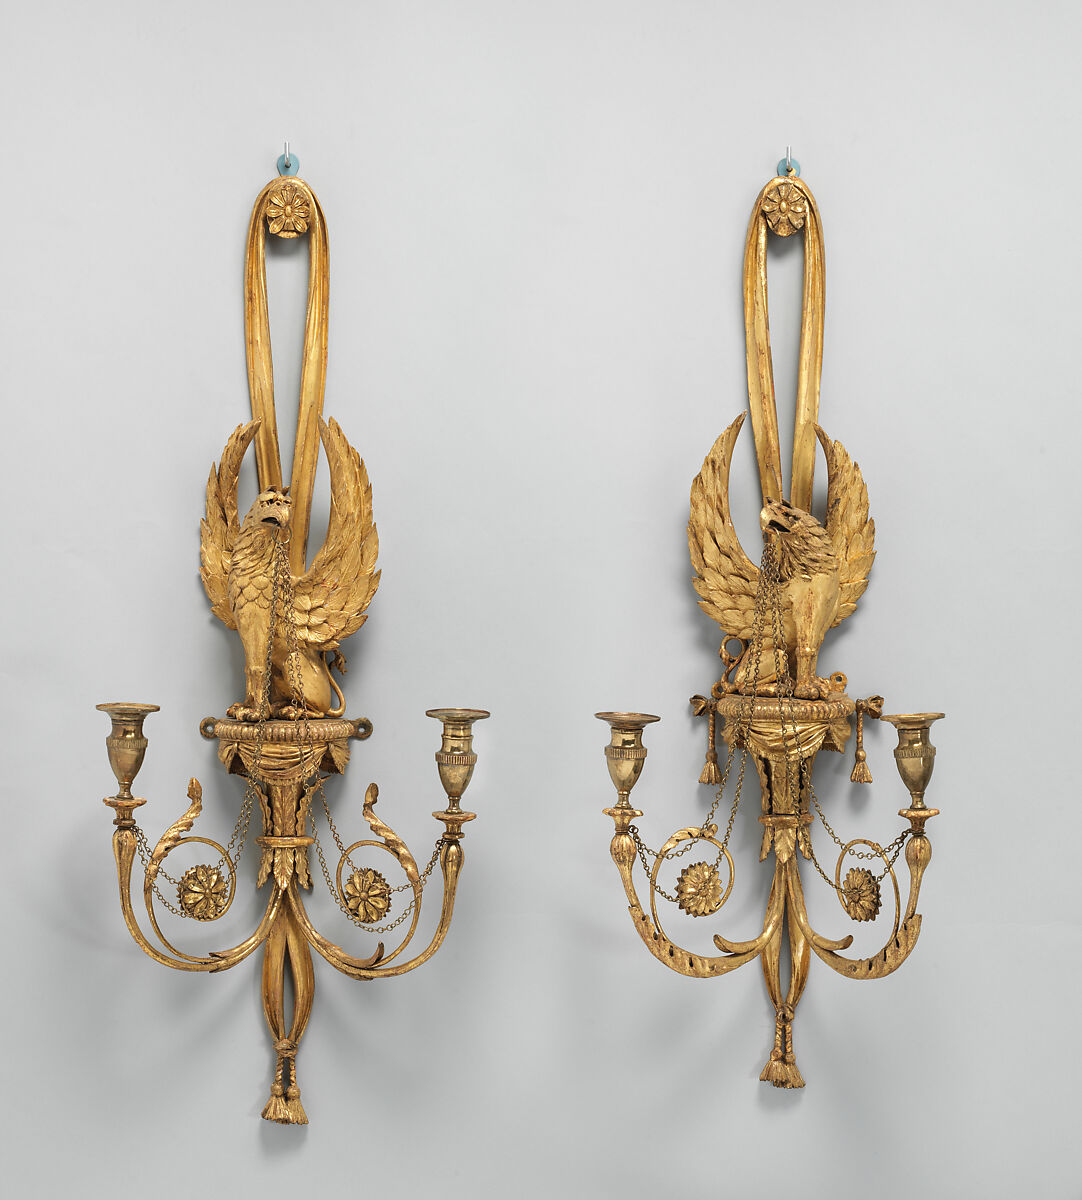 Sconce (one of a pair), Gilded wood and gesso, gilded brass, British 